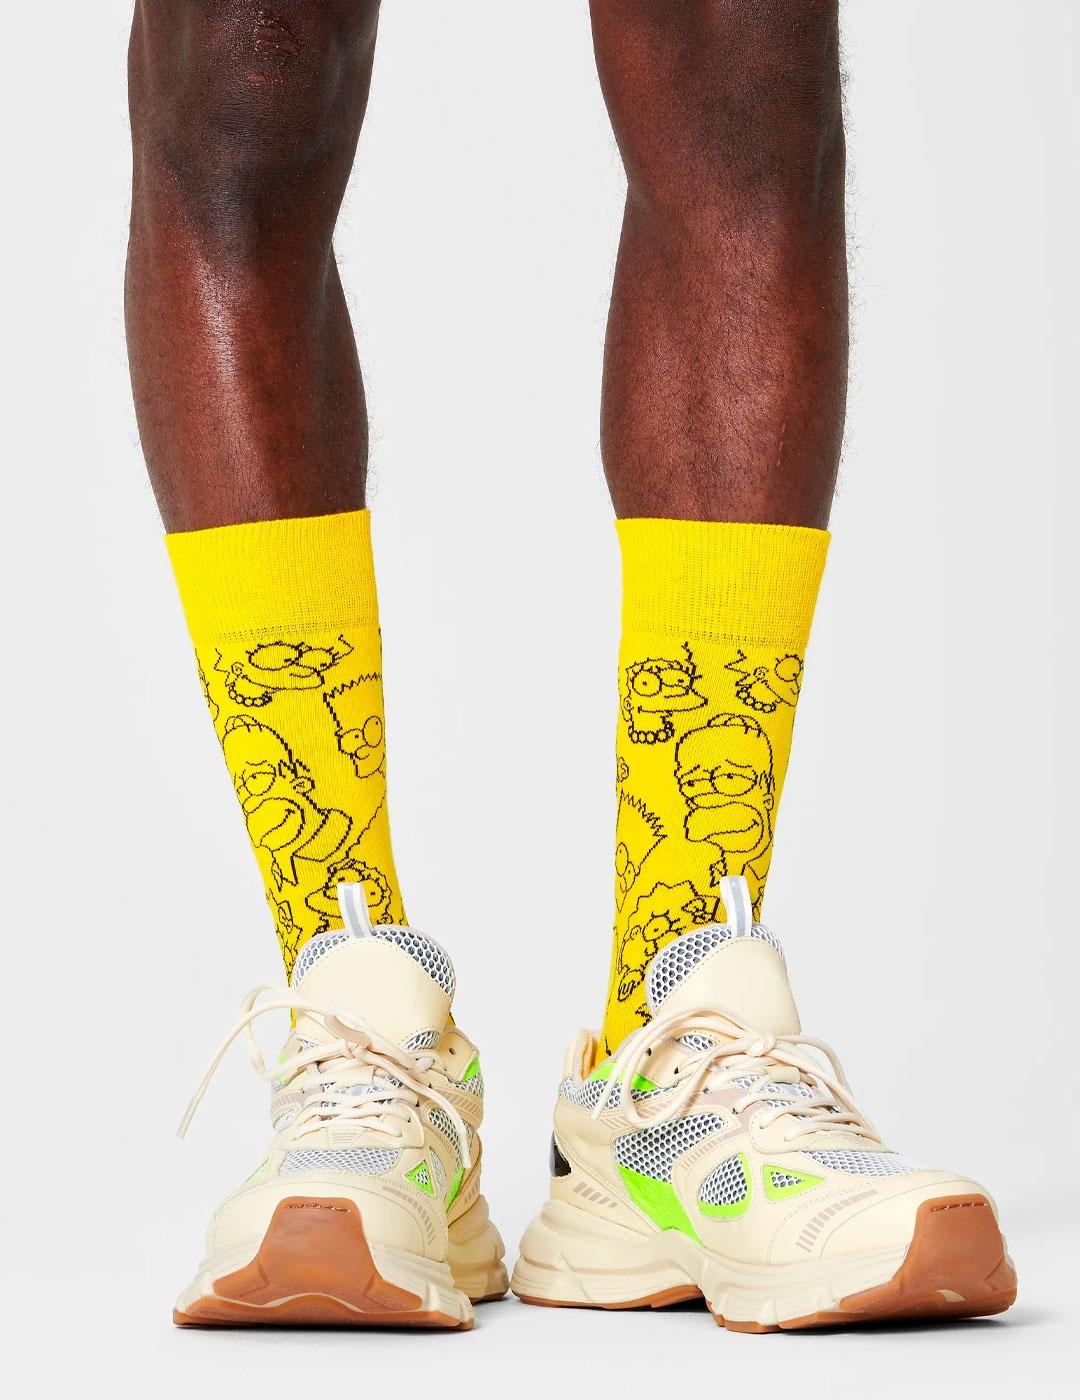 THE SIMPSONS FAMILY SOCK